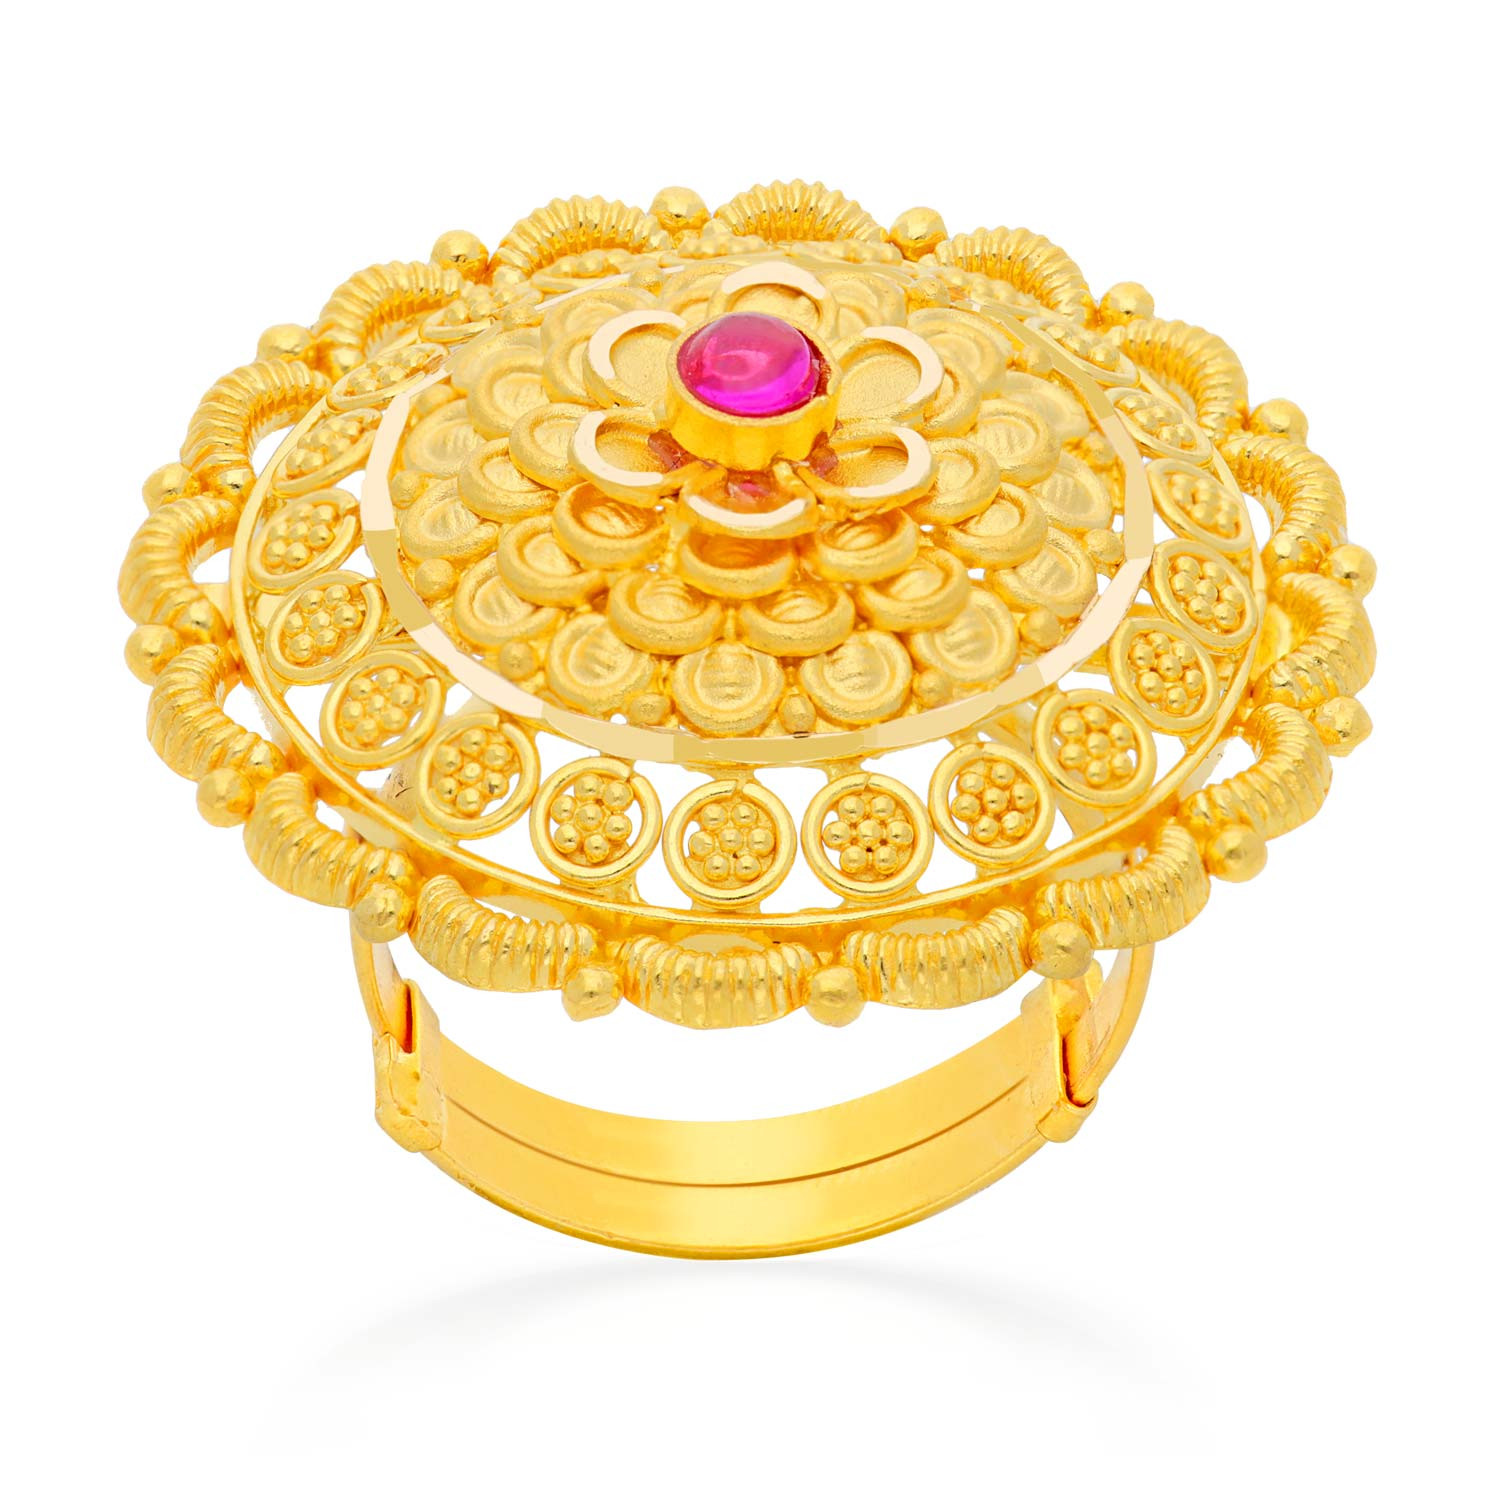 LORDS JEWELS Piccadilly Diamond Ring 14kt Diamond Yellow Gold ring Price in  India - Buy LORDS JEWELS Piccadilly Diamond Ring 14kt Diamond Yellow Gold  ring online at Flipkart.com